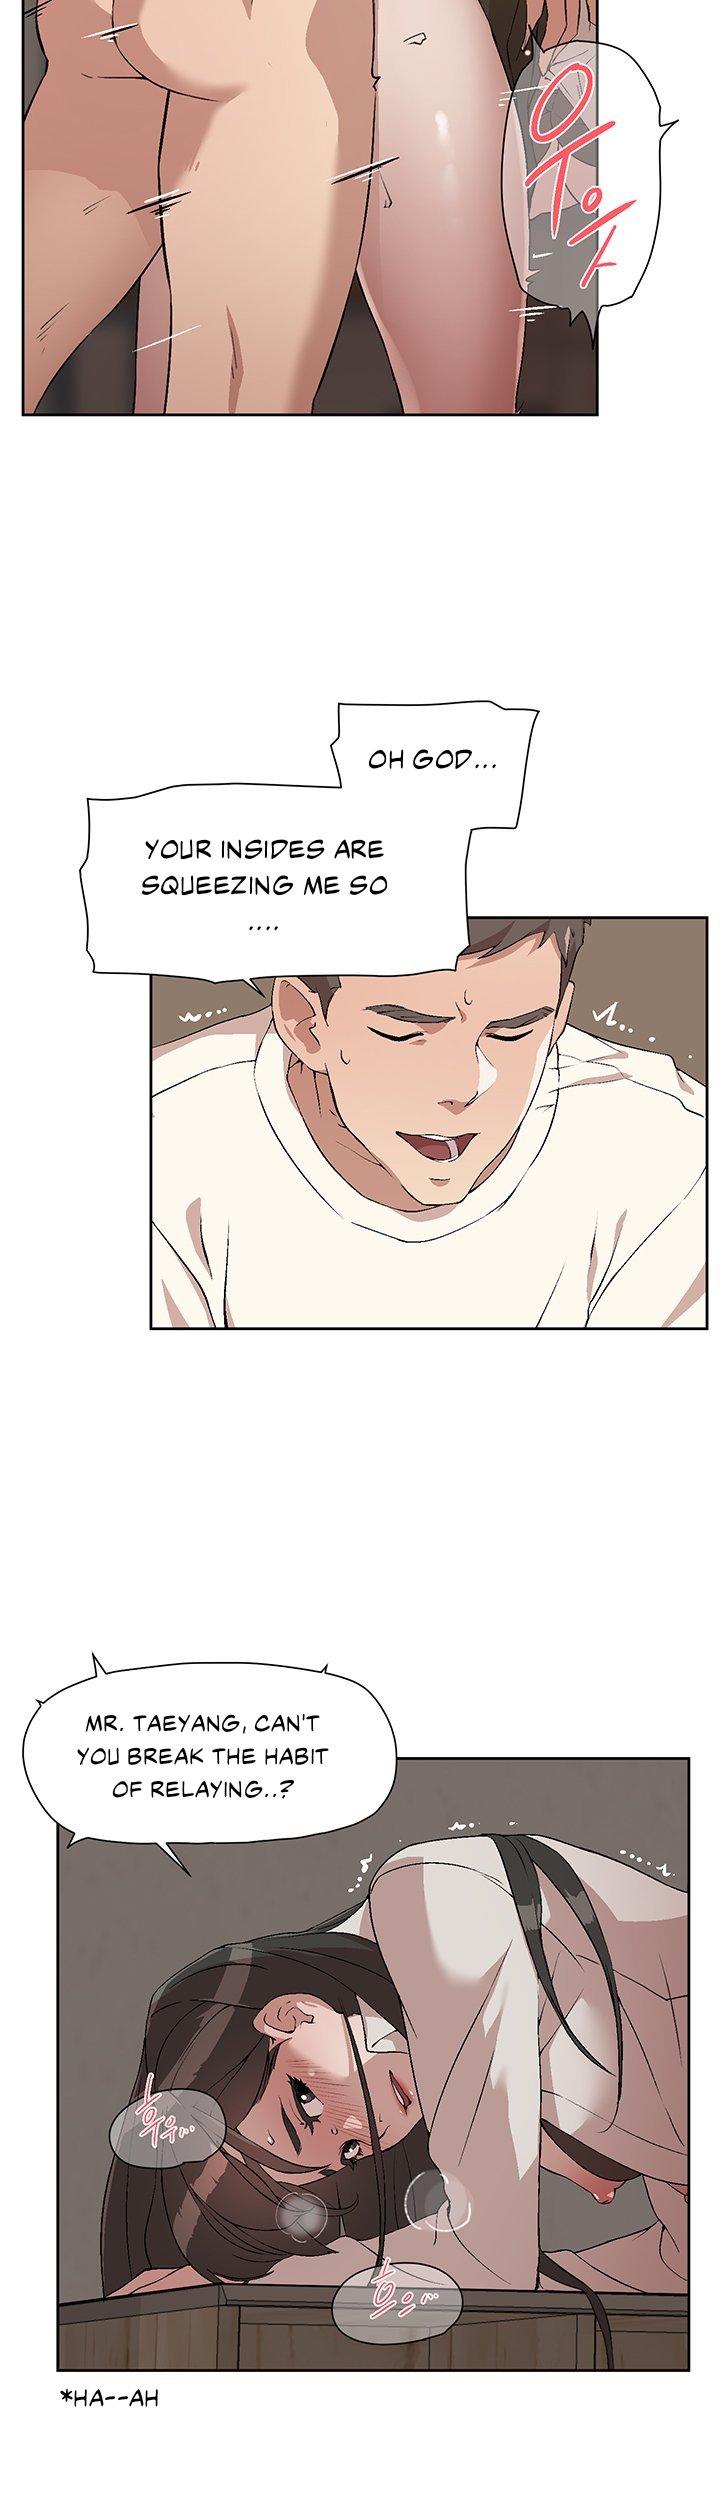 Dick Sucking Porn Everything about Best Friend Manhwa 01-13 Piercings - Page 10